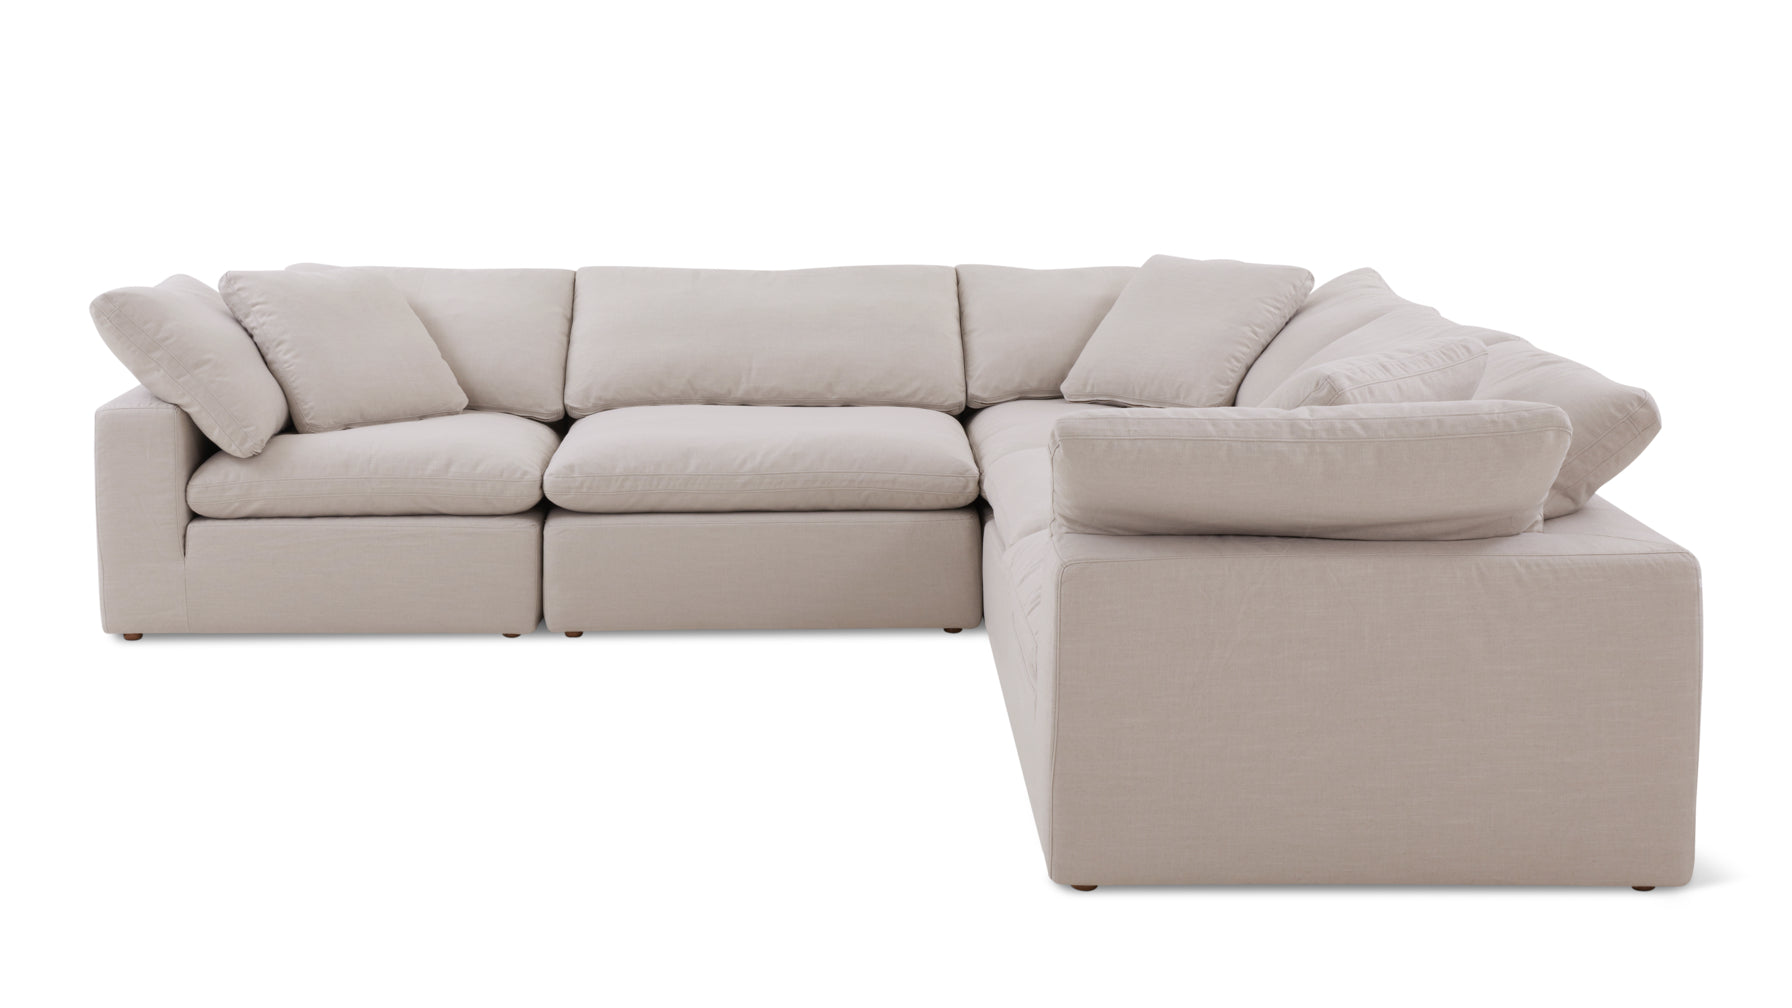 Movie Night™ 5-Piece Modular Sectional Closed, Standard, Clay - Image 1